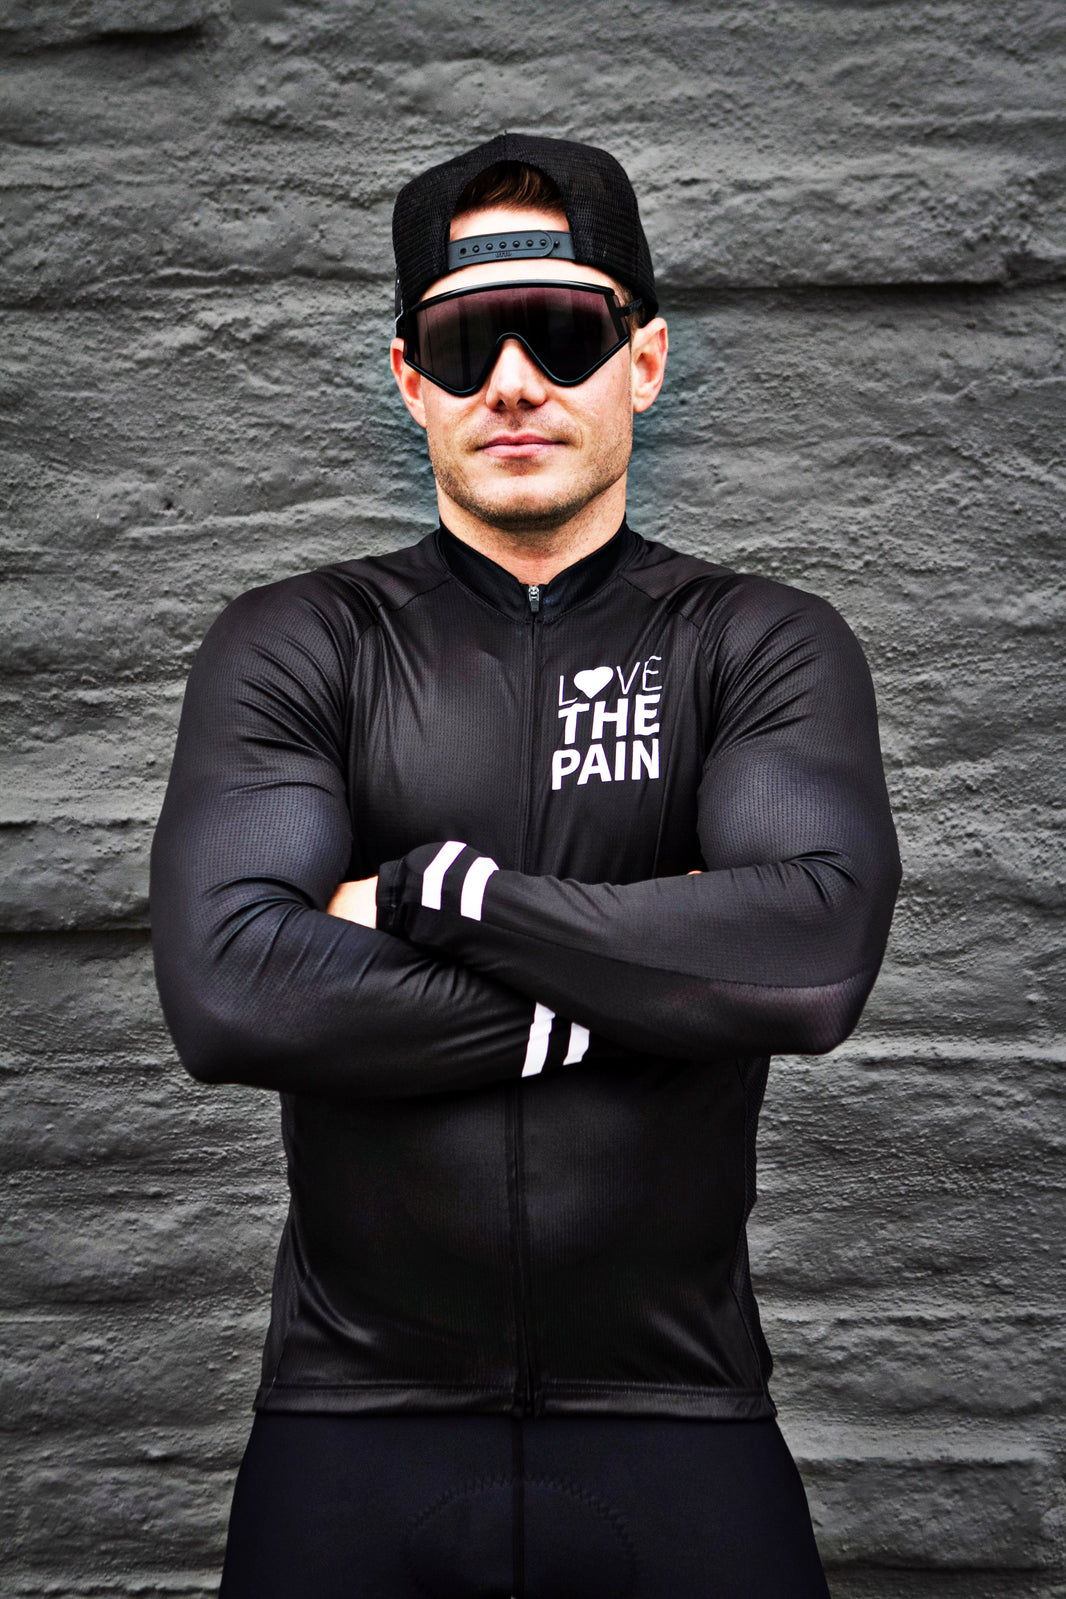 Long Sleeve Top Cycling Jersey